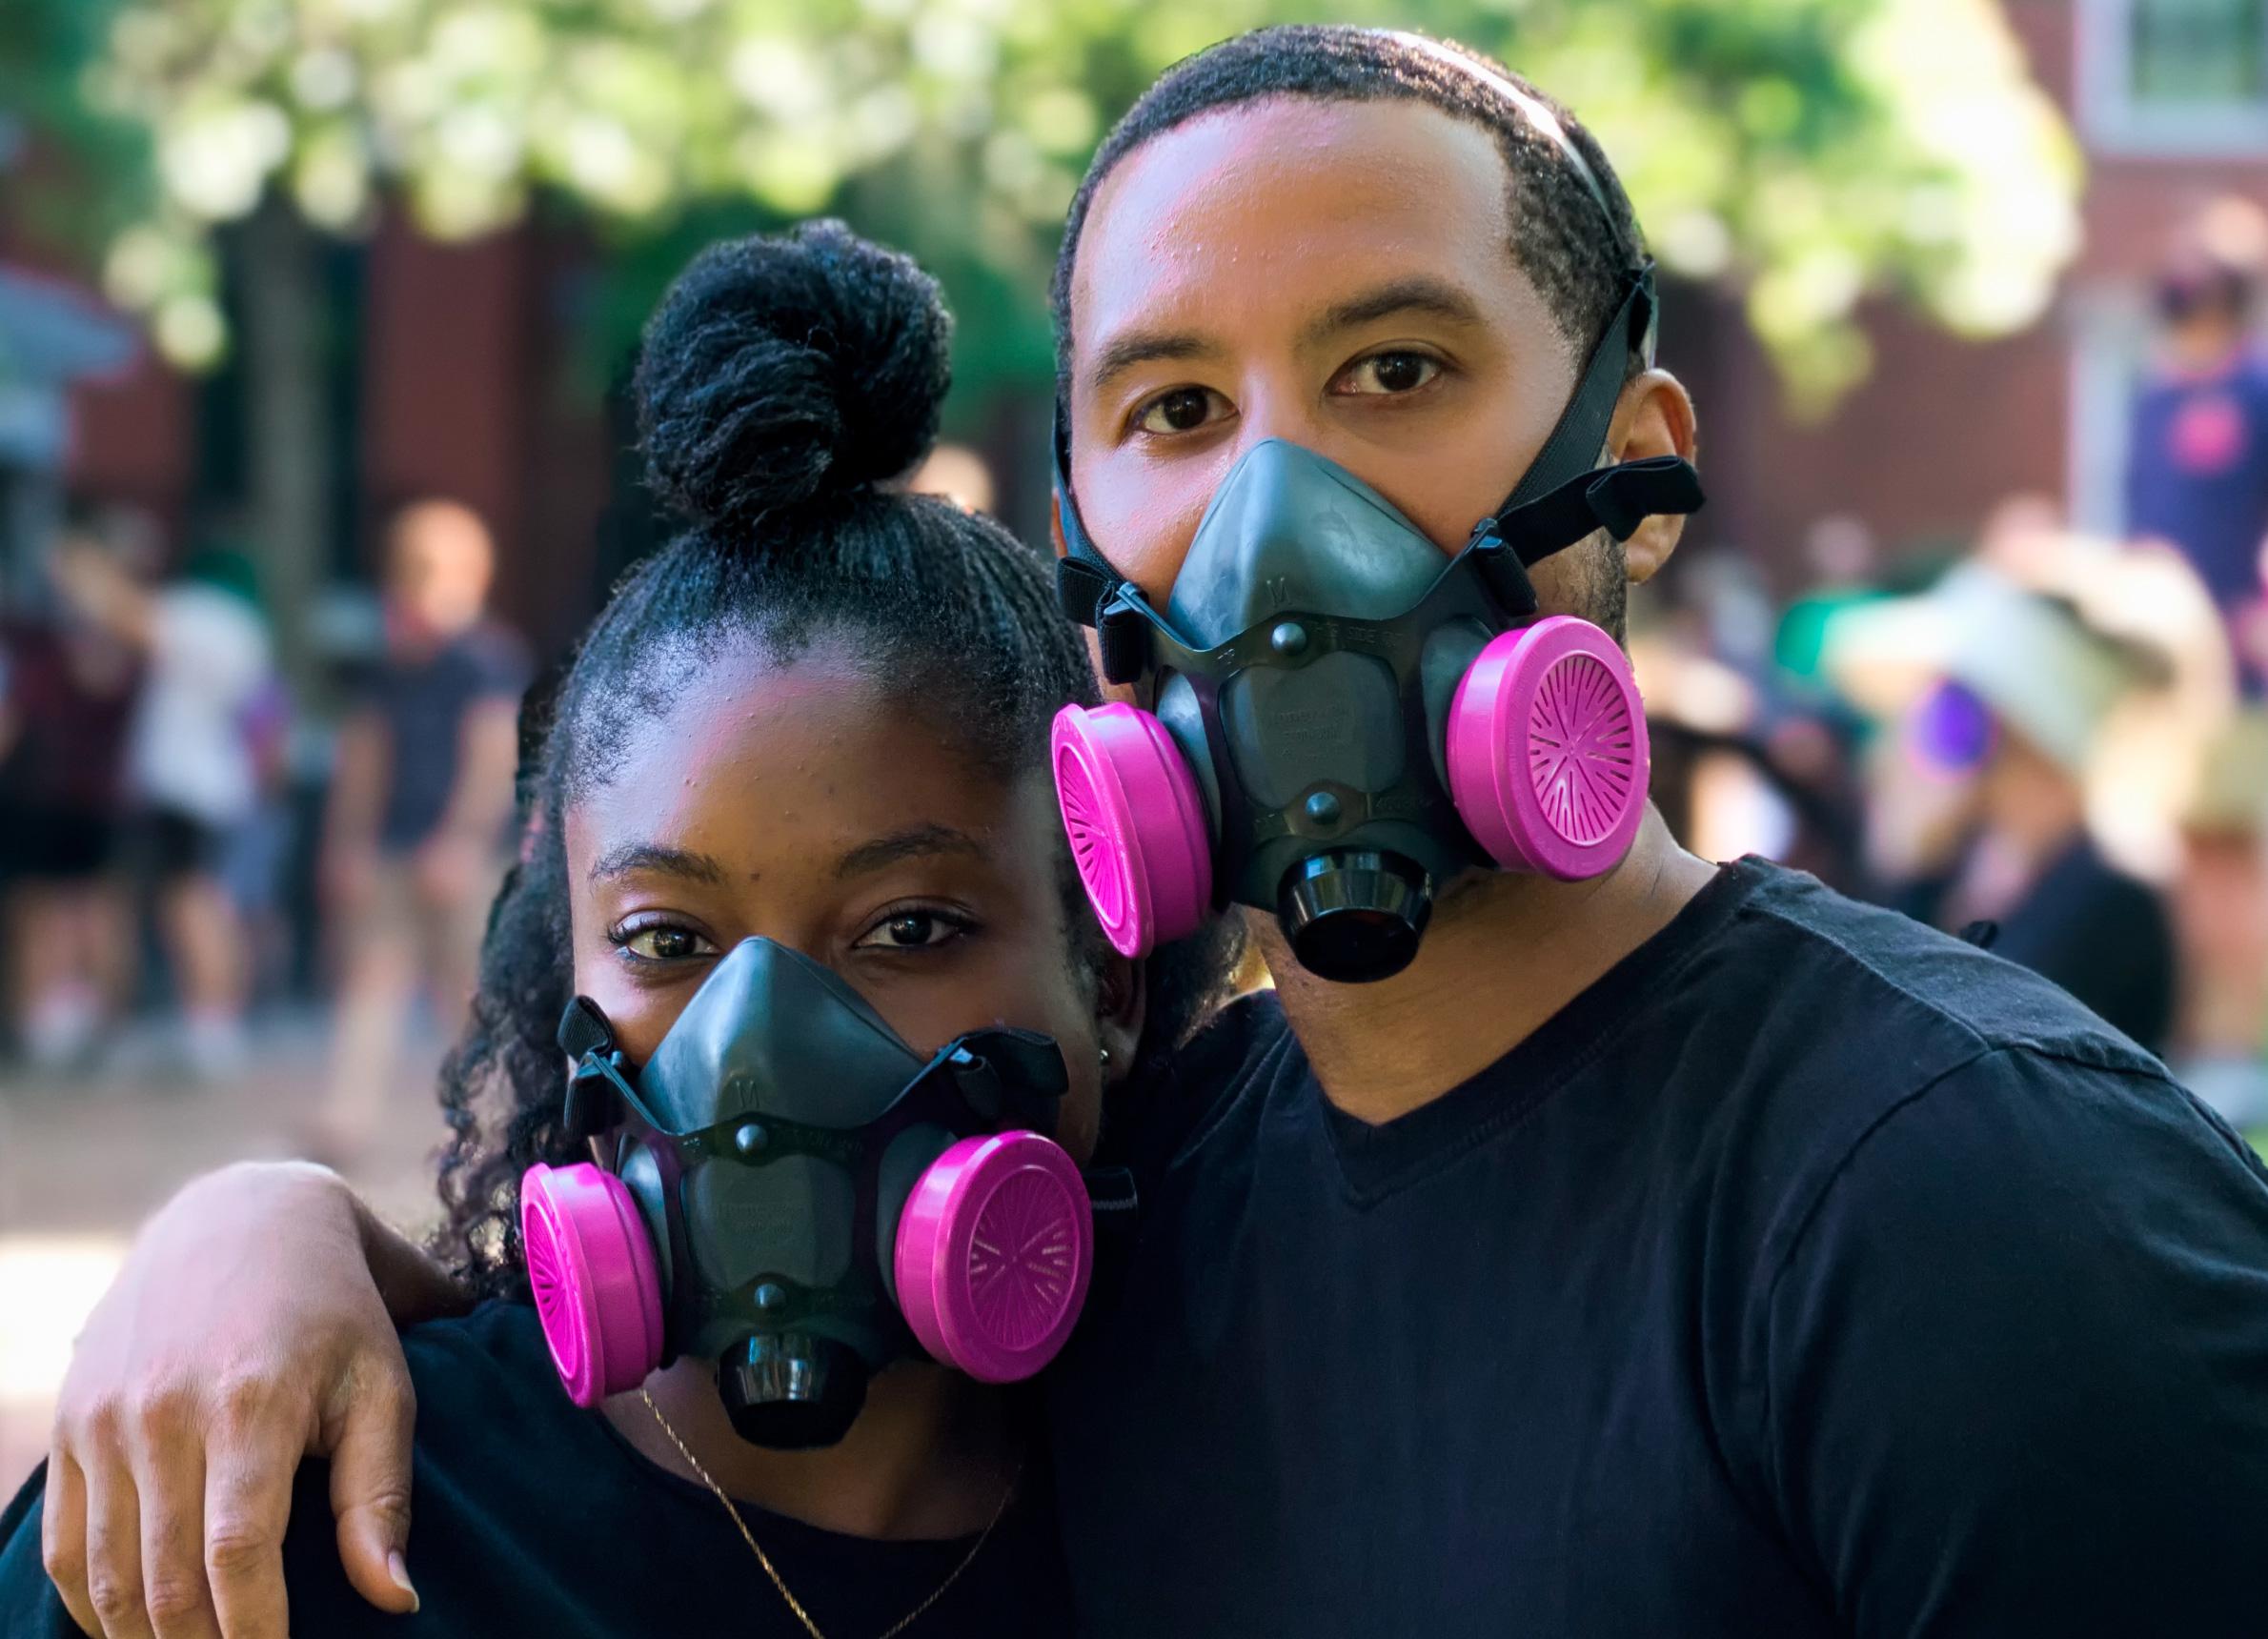 Image of Black people wearing masks and looking into the camera